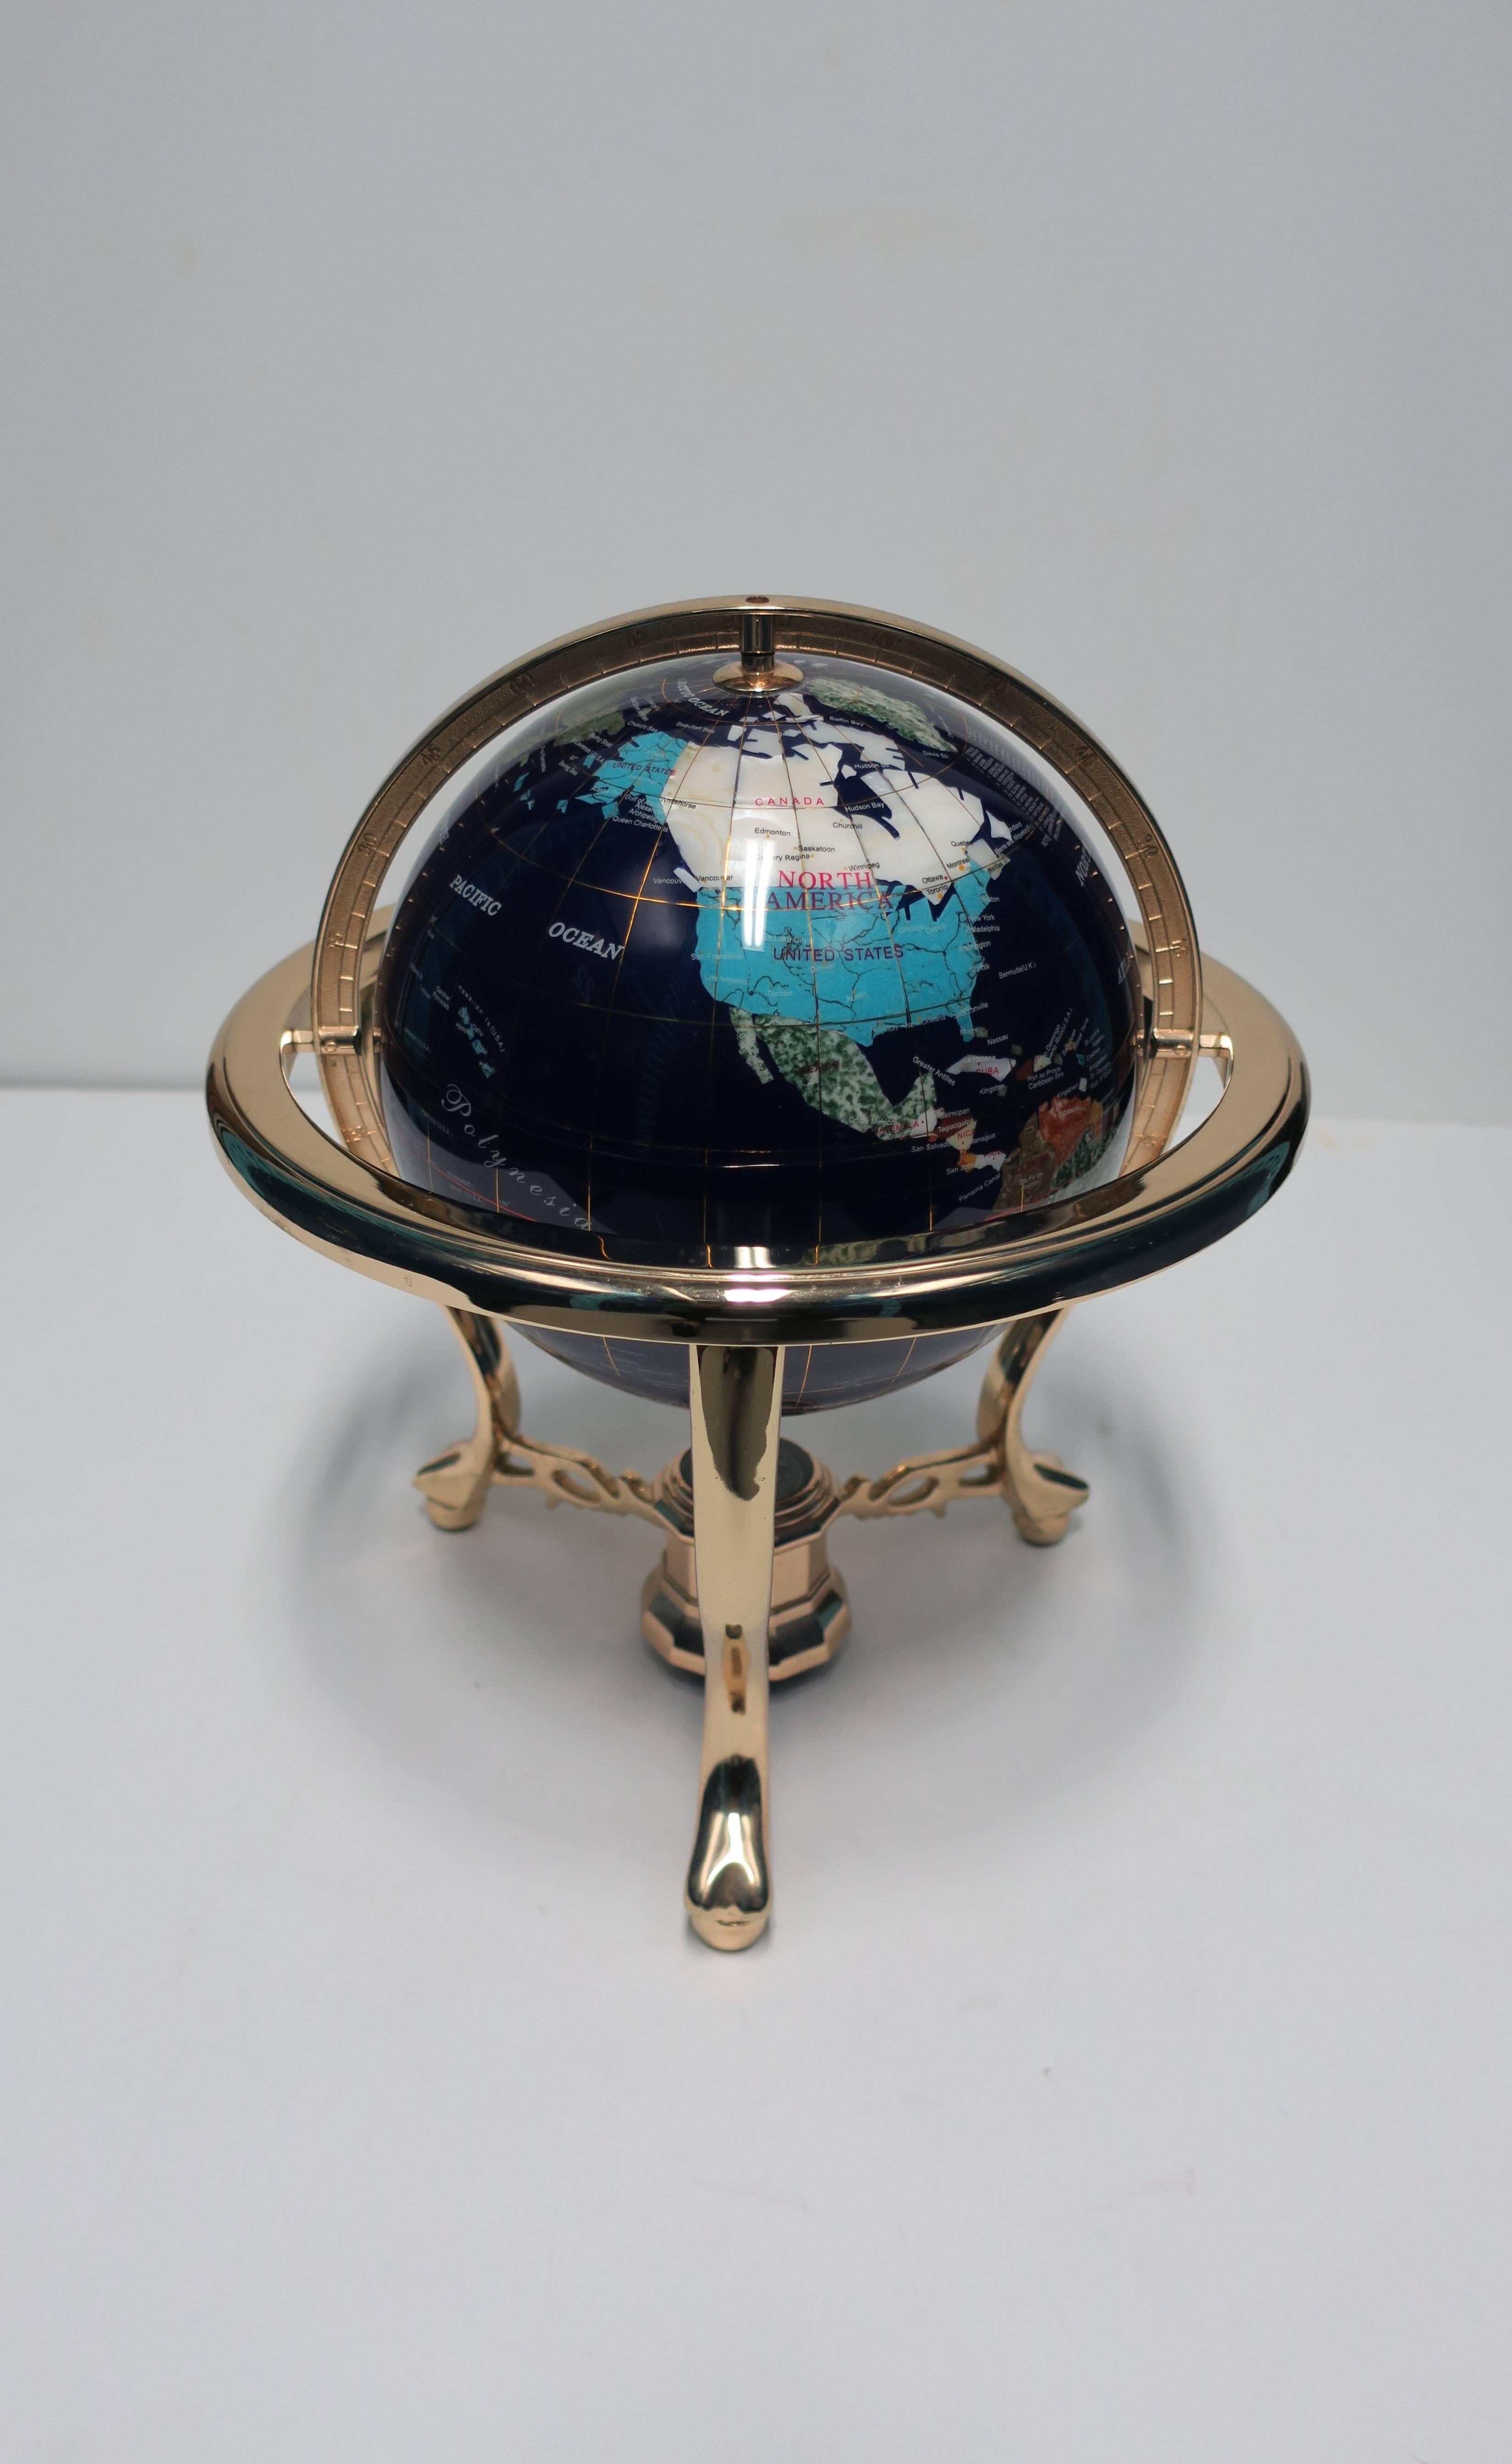 A beautiful vintage world globe comprised of various stones such as marble, mother-of-pearl, onyx, and many others, as show in images. Globe sits in a tripod base and can be spun 360 degrees. 

Measures: 13.5 in. H

Item available here online. By